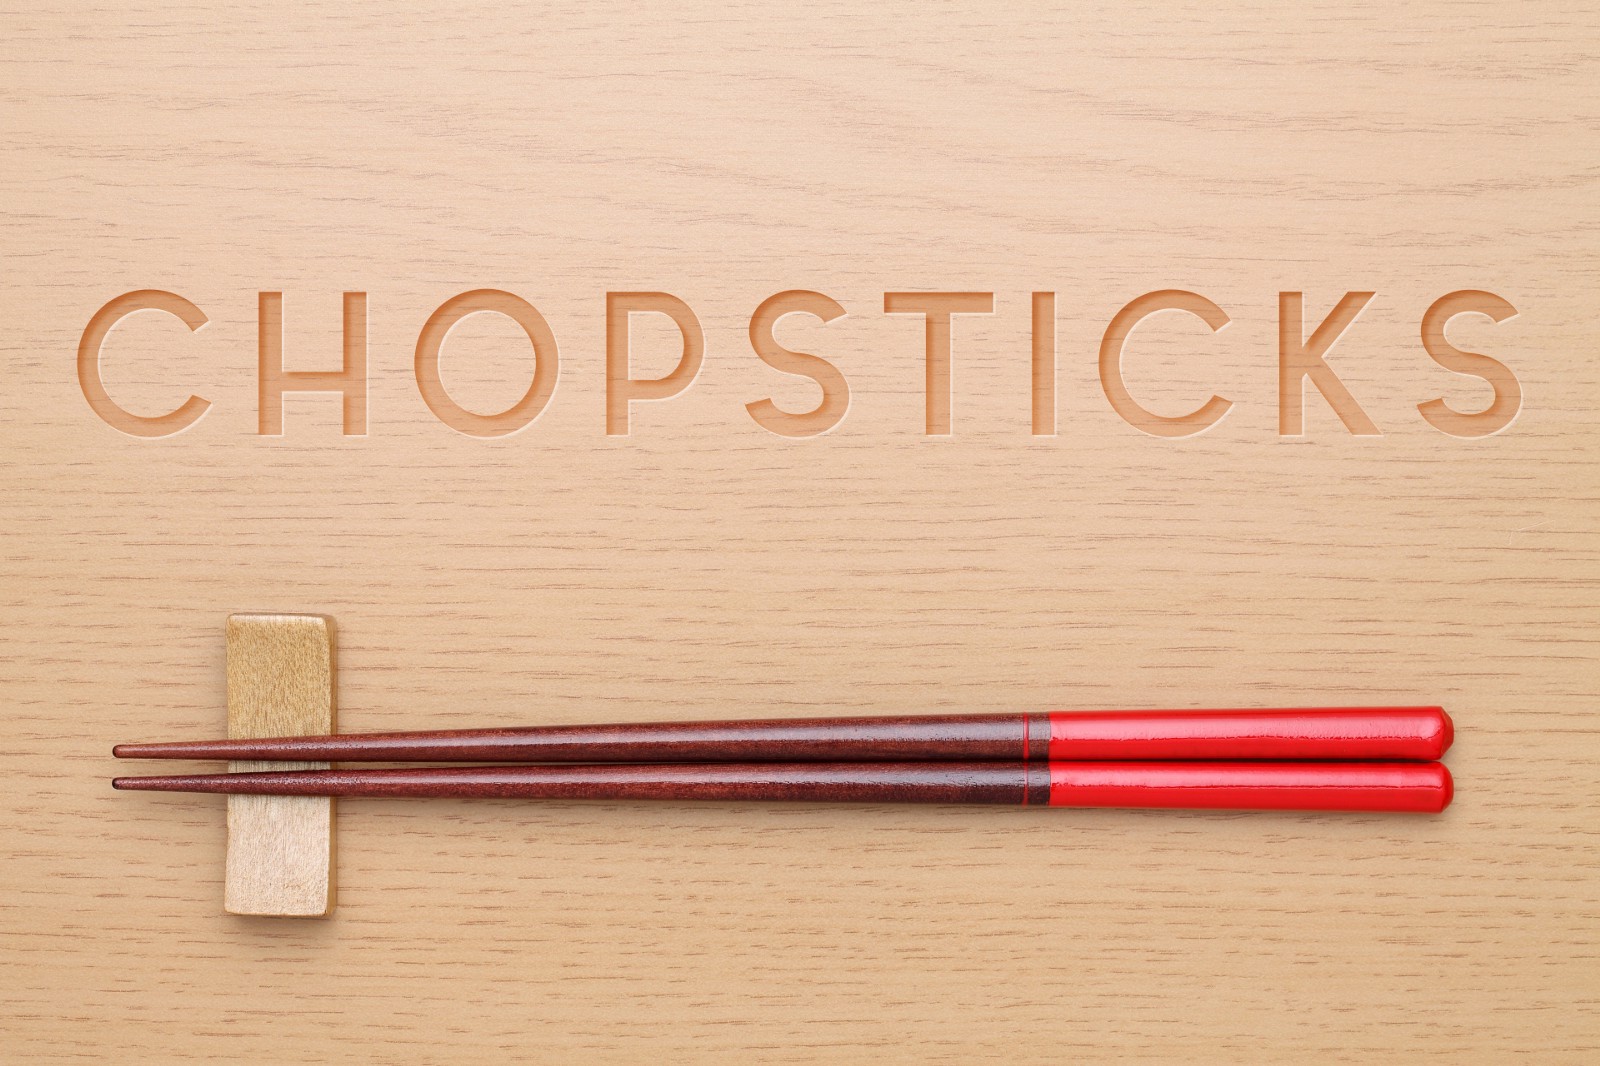 How to Use Chopsticks in Japan